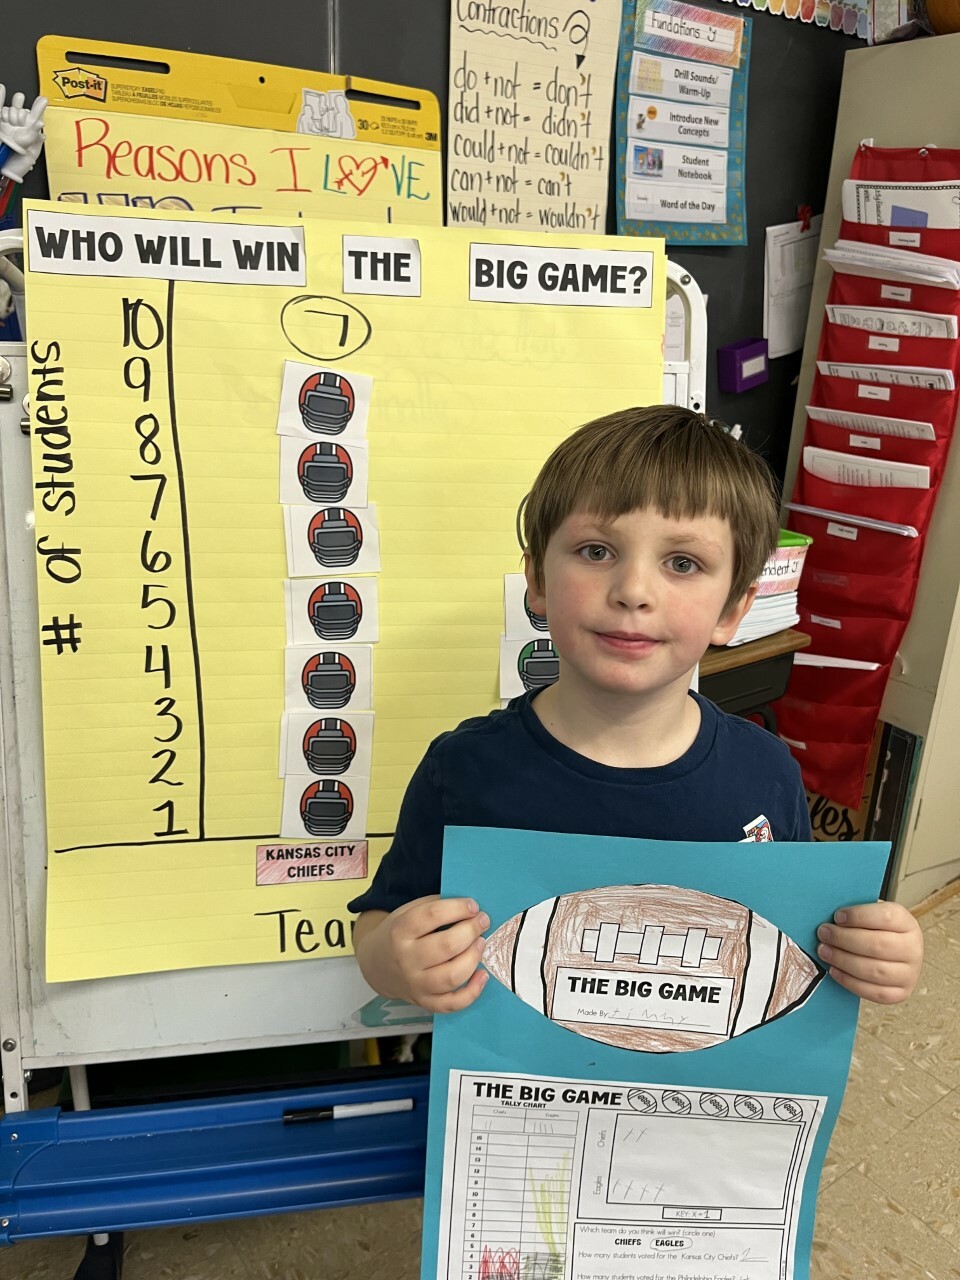 Jimmy Tuoohy and his classmates Hampton Bays Elementary School correctly predicted that the Kansas City Chiefs would win the Super Bowl. The students had placed and graphed votes during class prior to the game, and after analyzing their data, surmised that Kansas City would win the big game. COURTESY HAMPTON BAYS ELEMENTARY SCHOOL